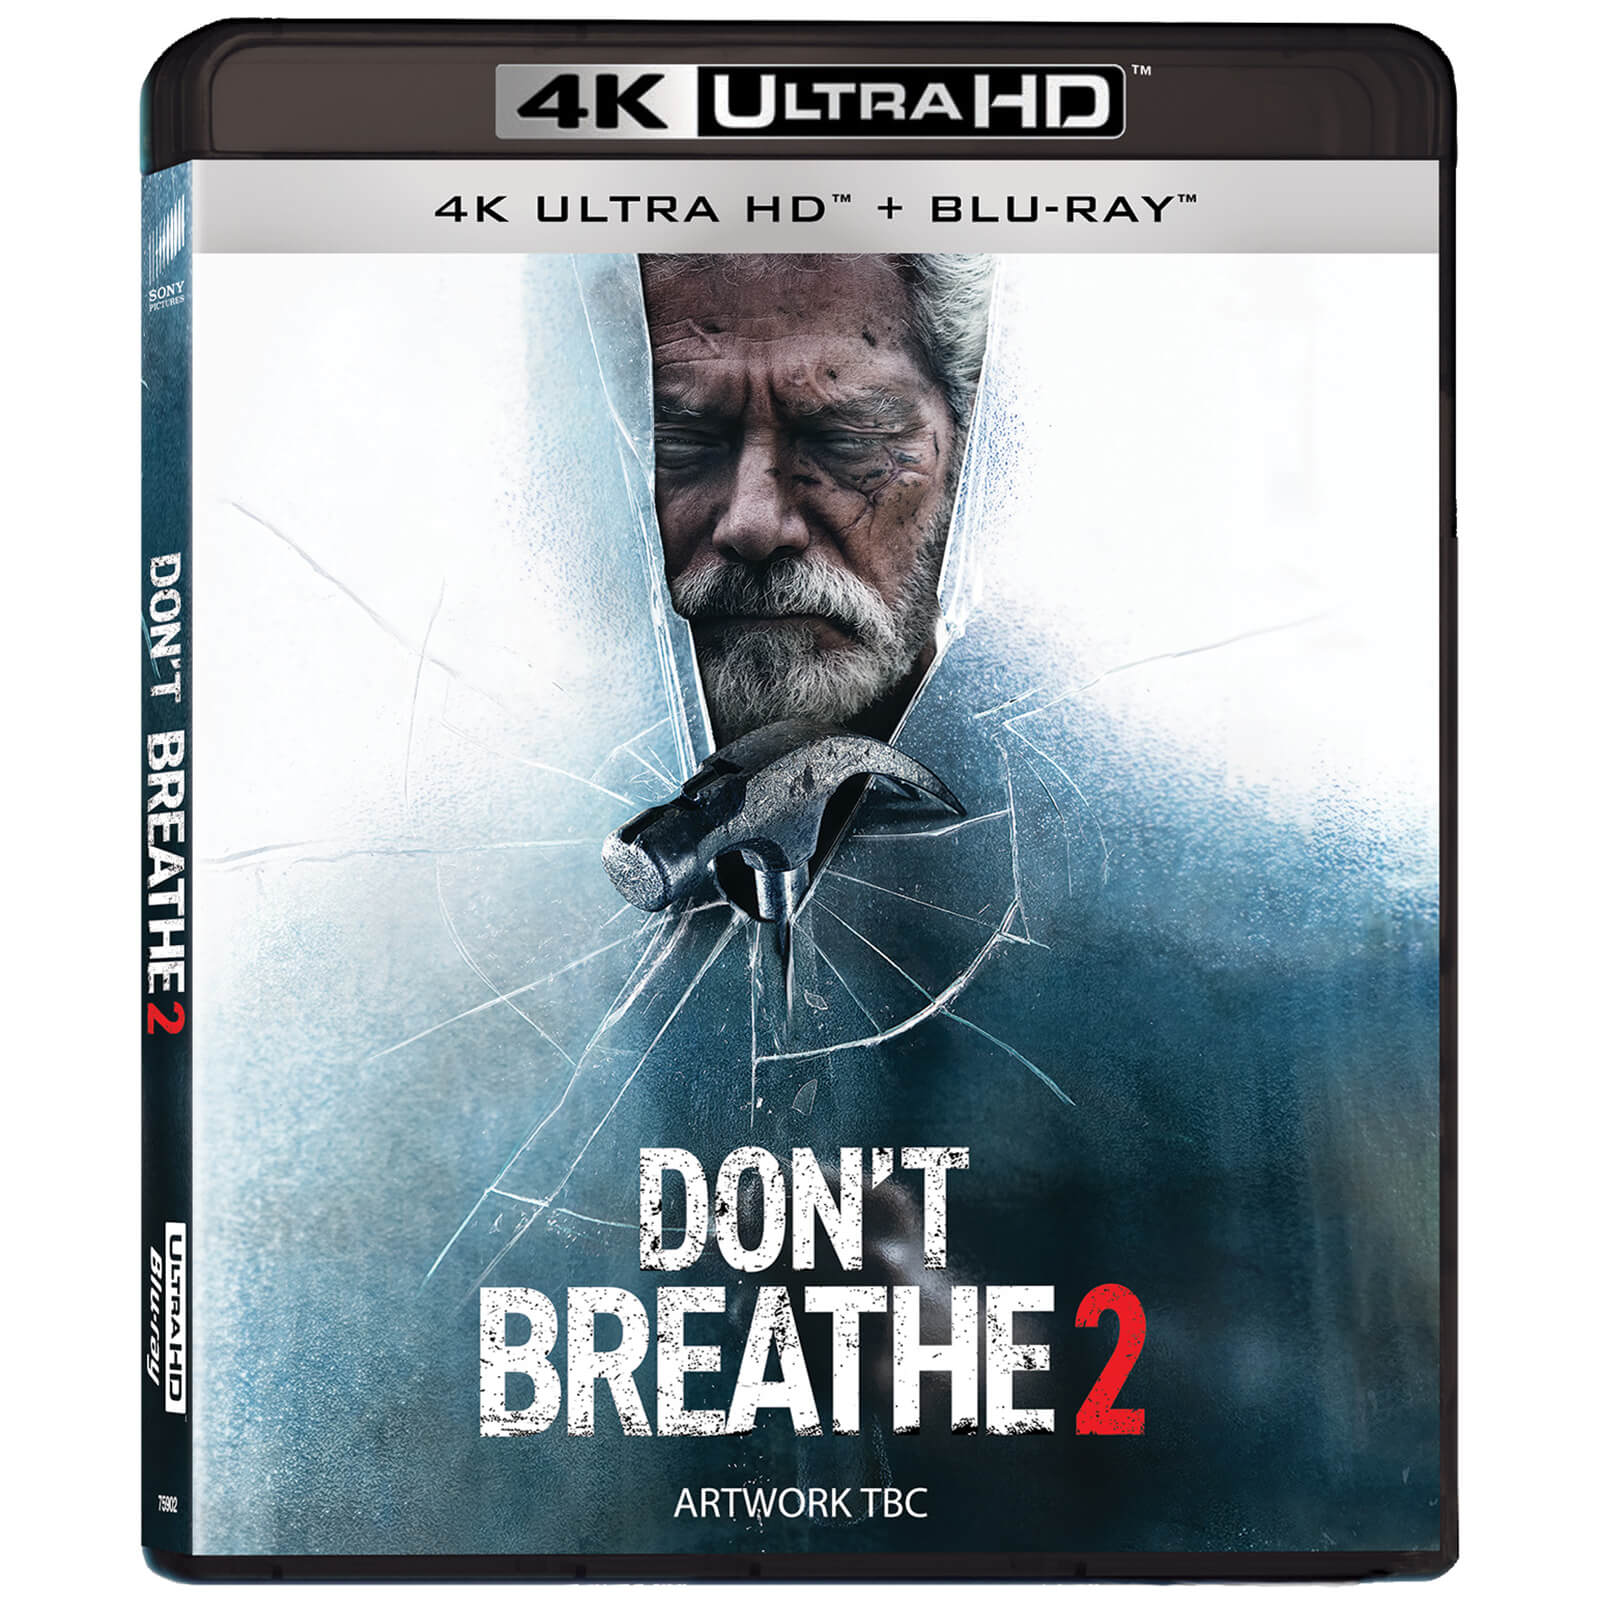 Sony Pictures Don't breathe 2 (2 discs - 4k ultra hd & blu-ray)